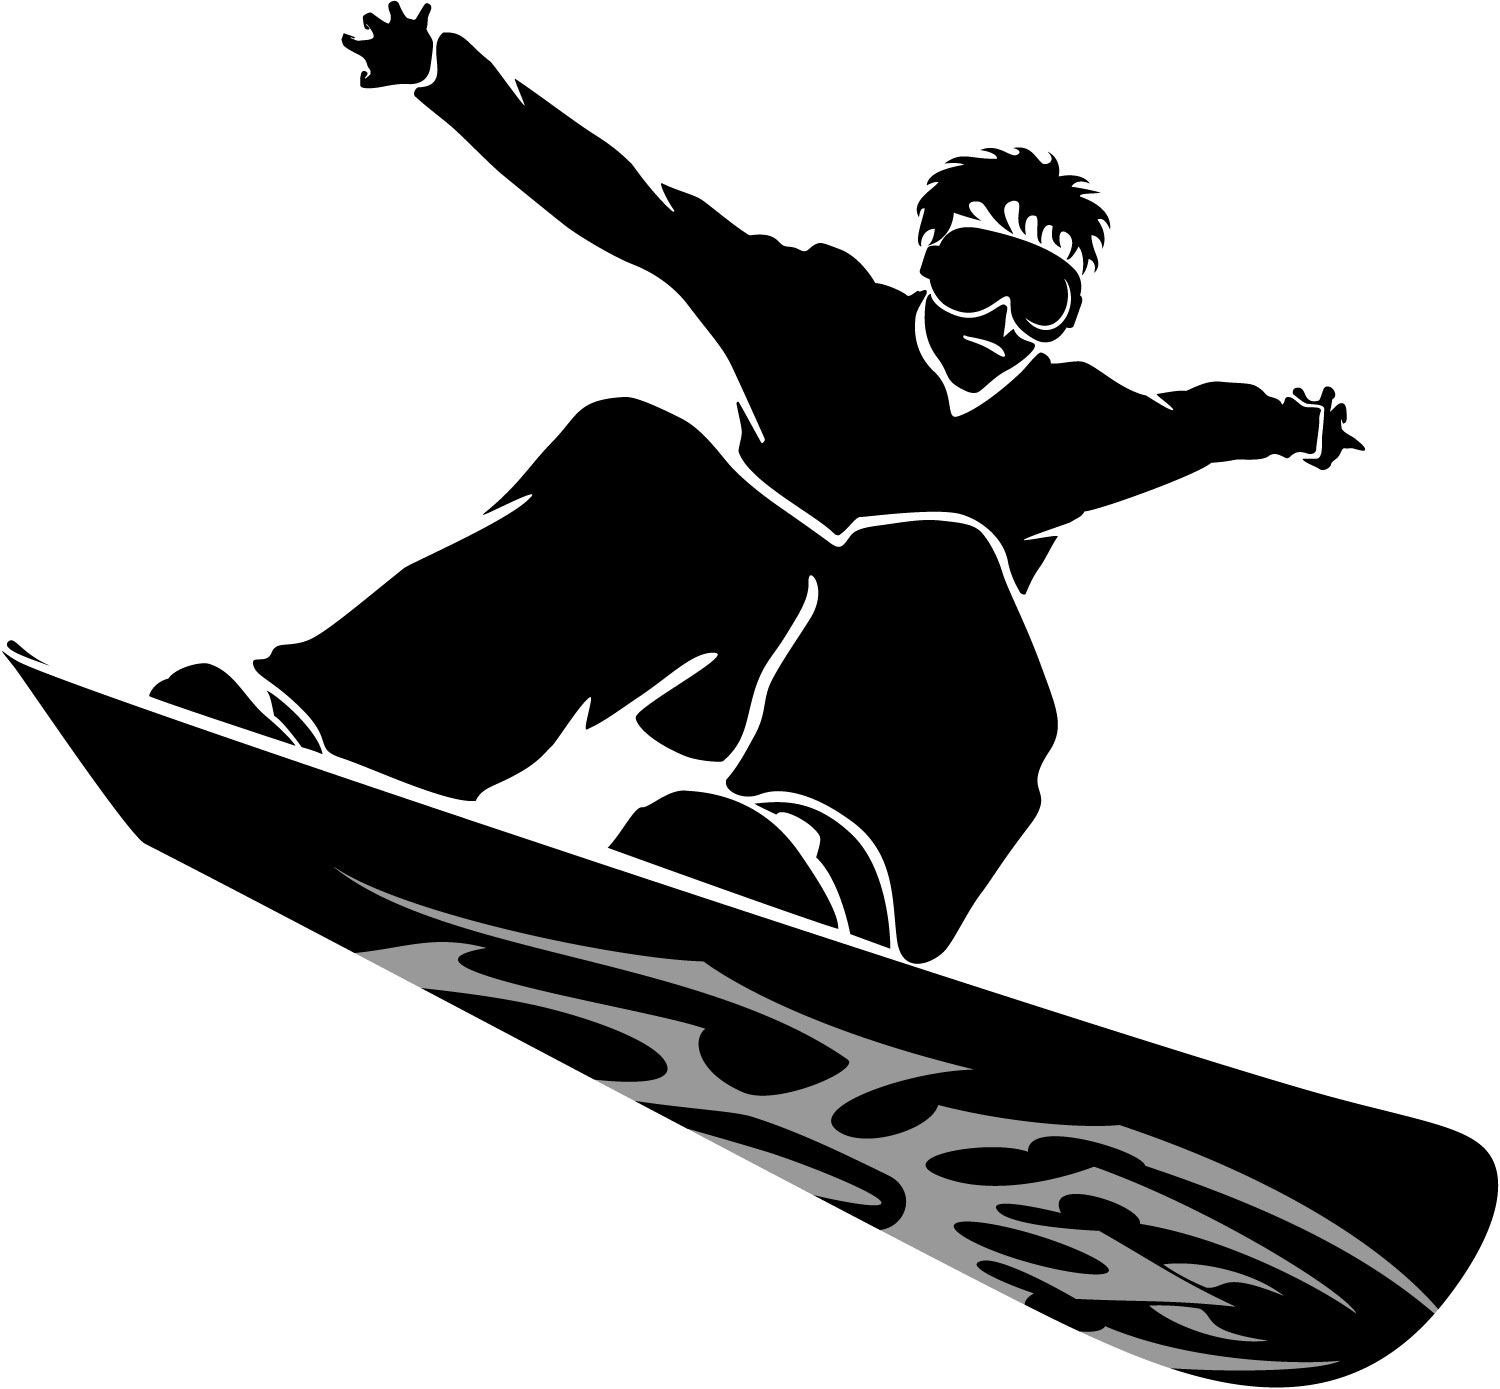 Skiing snowboarding clipart